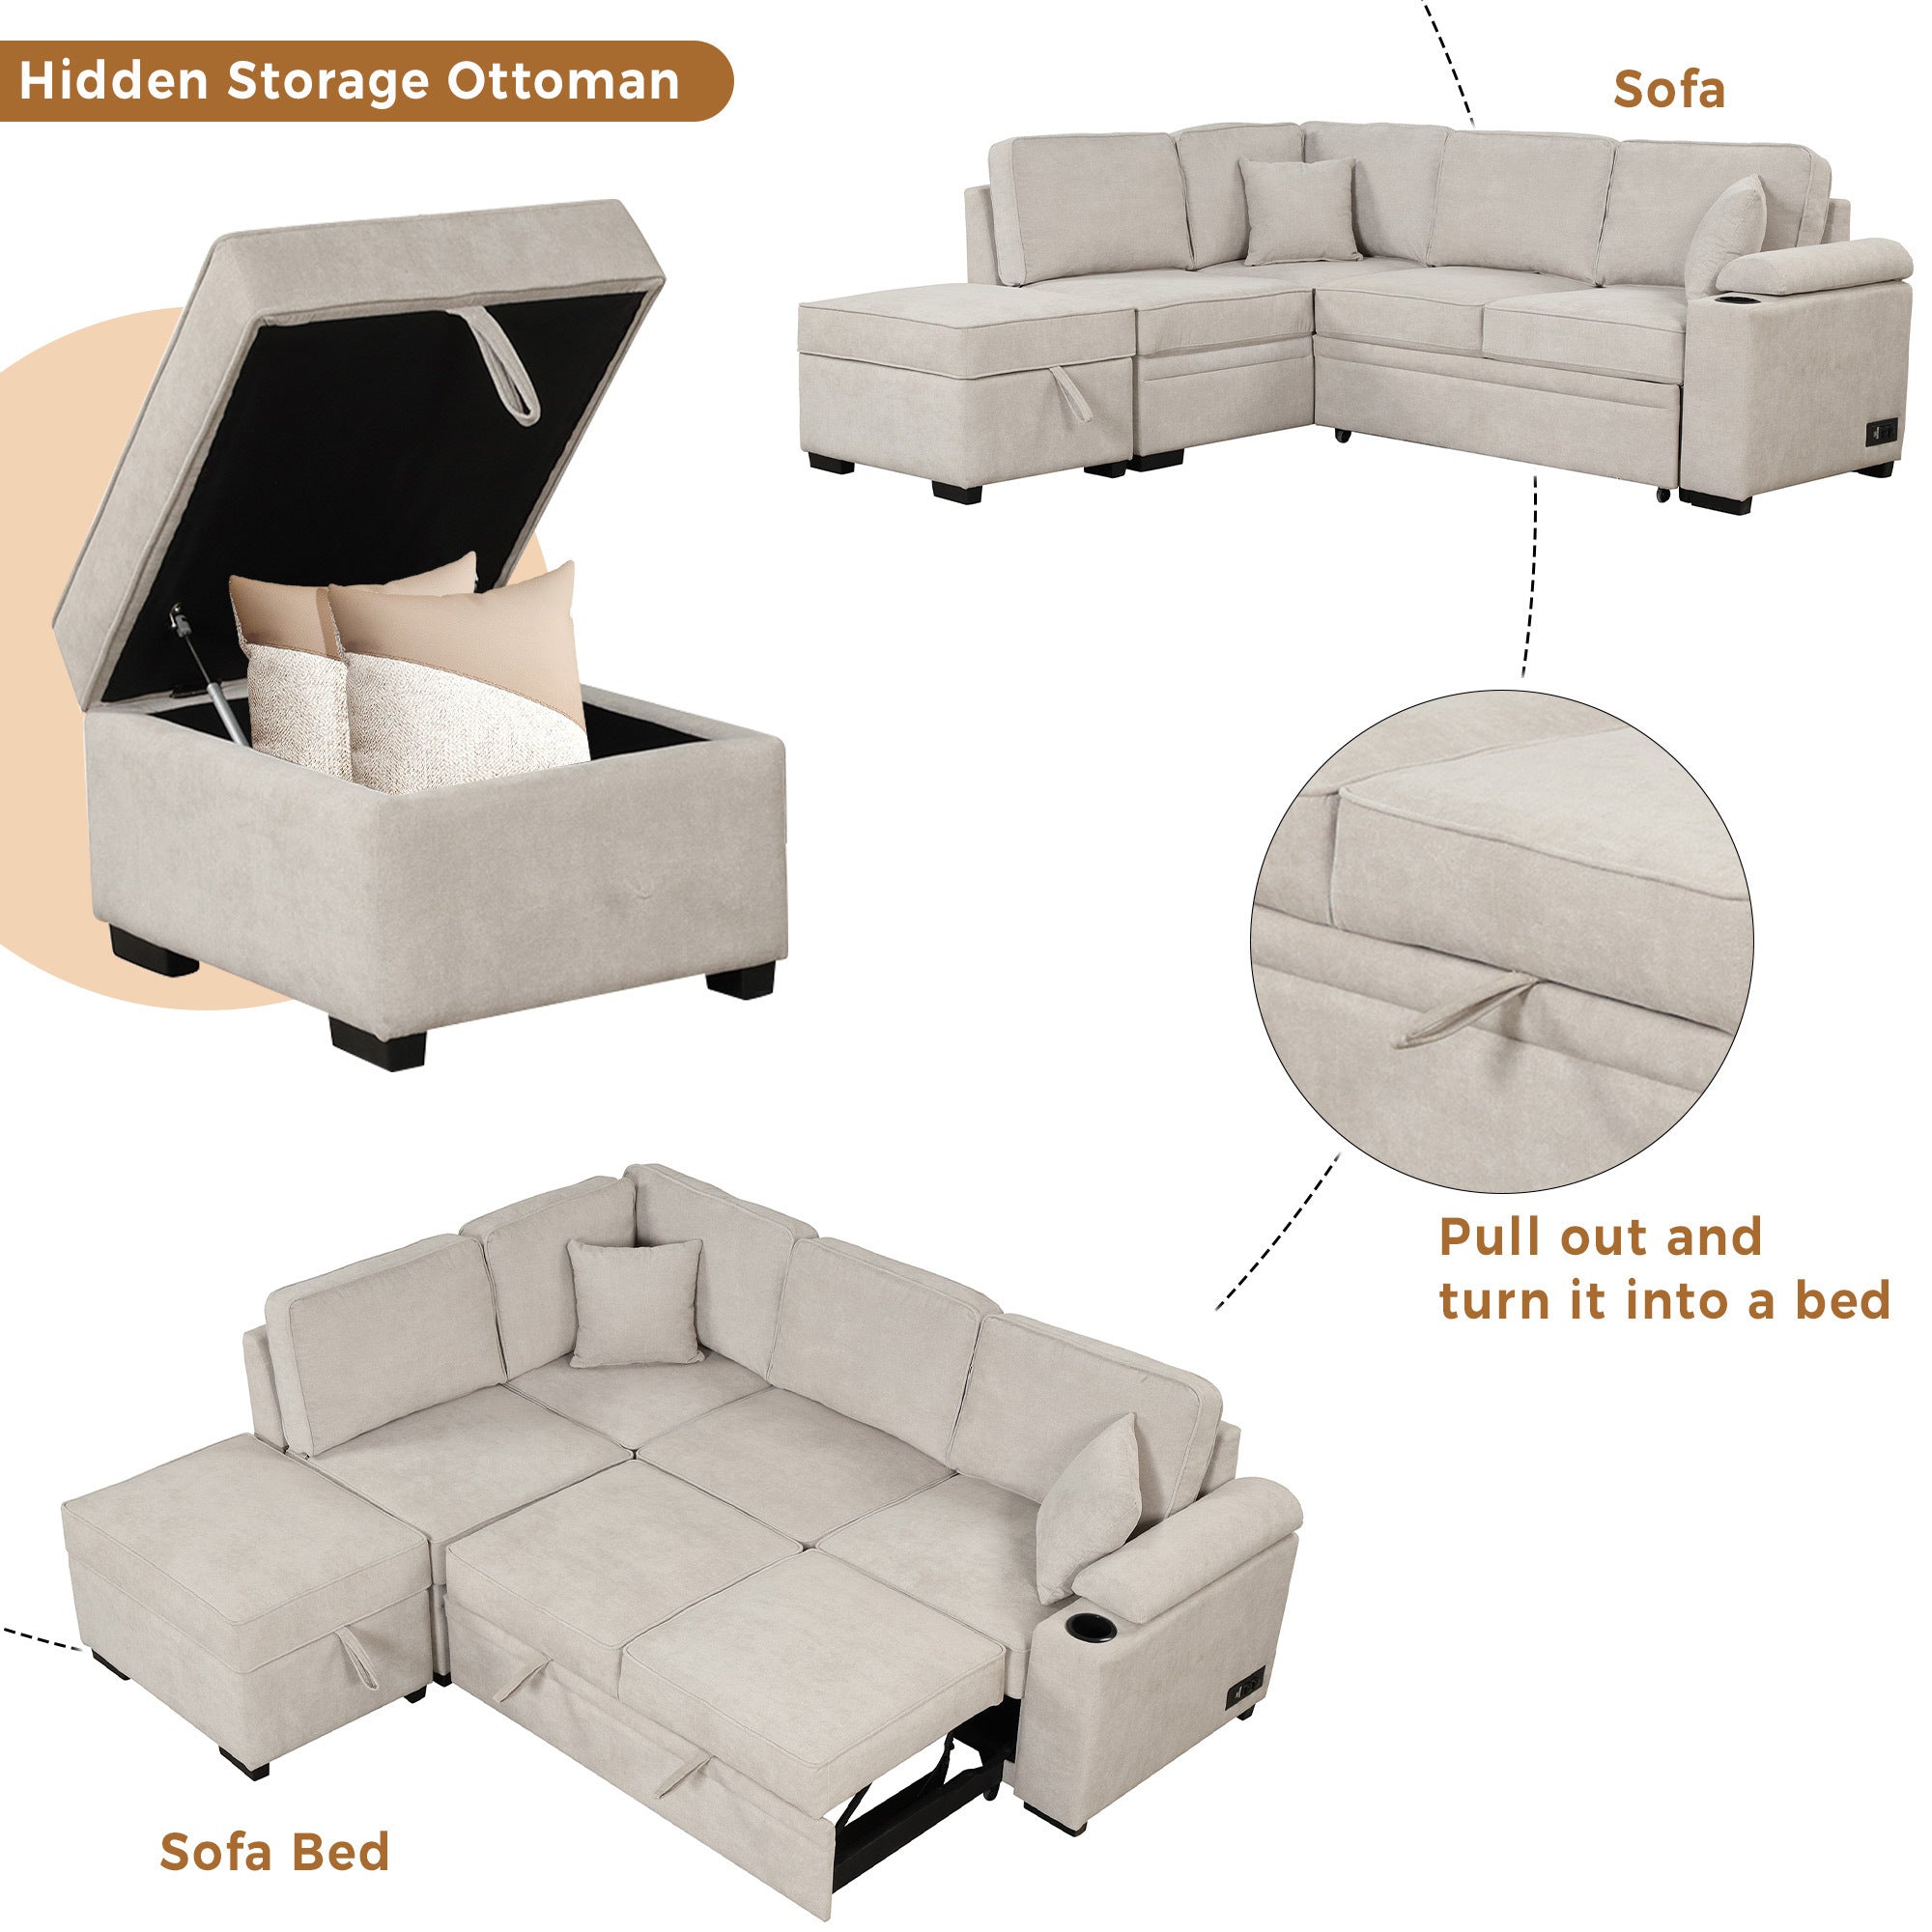 Beige Linen 87" Sectional Sleeper Sofa w/ Storage Ottoman-Sleeper Sectionals-American Furniture Outlet